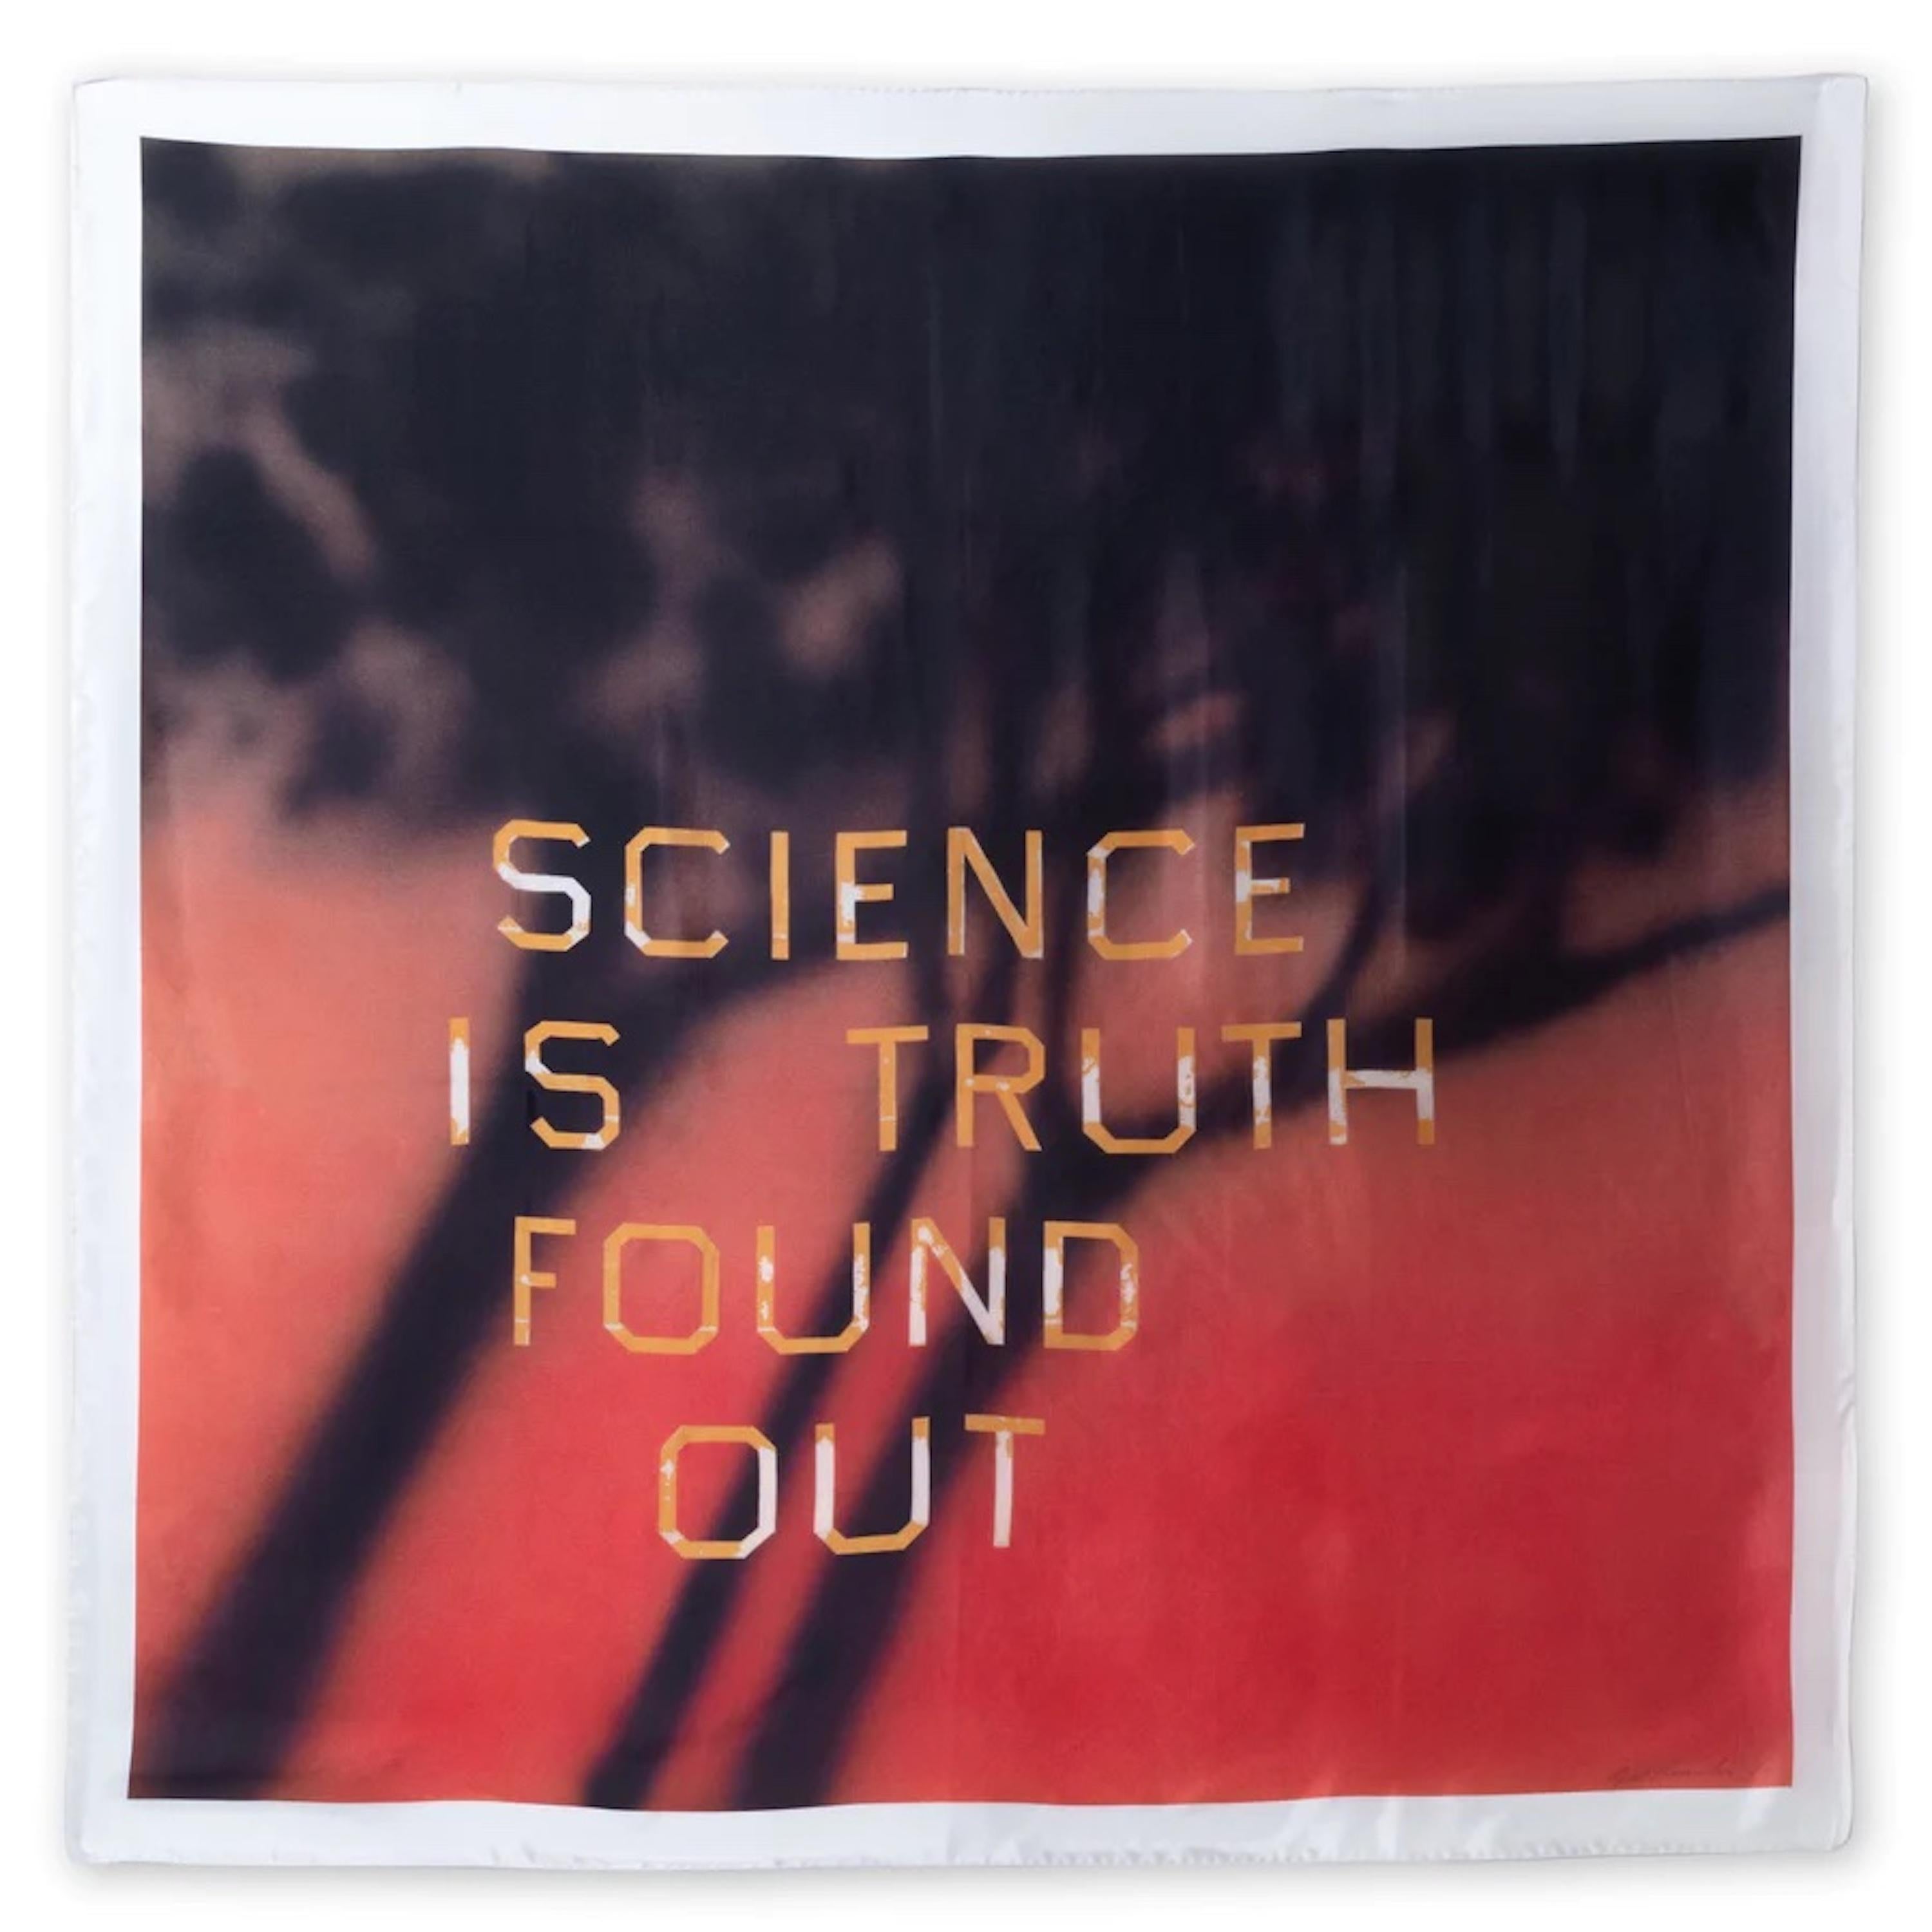 Science is Truth Found Out (Red) Limited Edition scarf , held in bespoke box